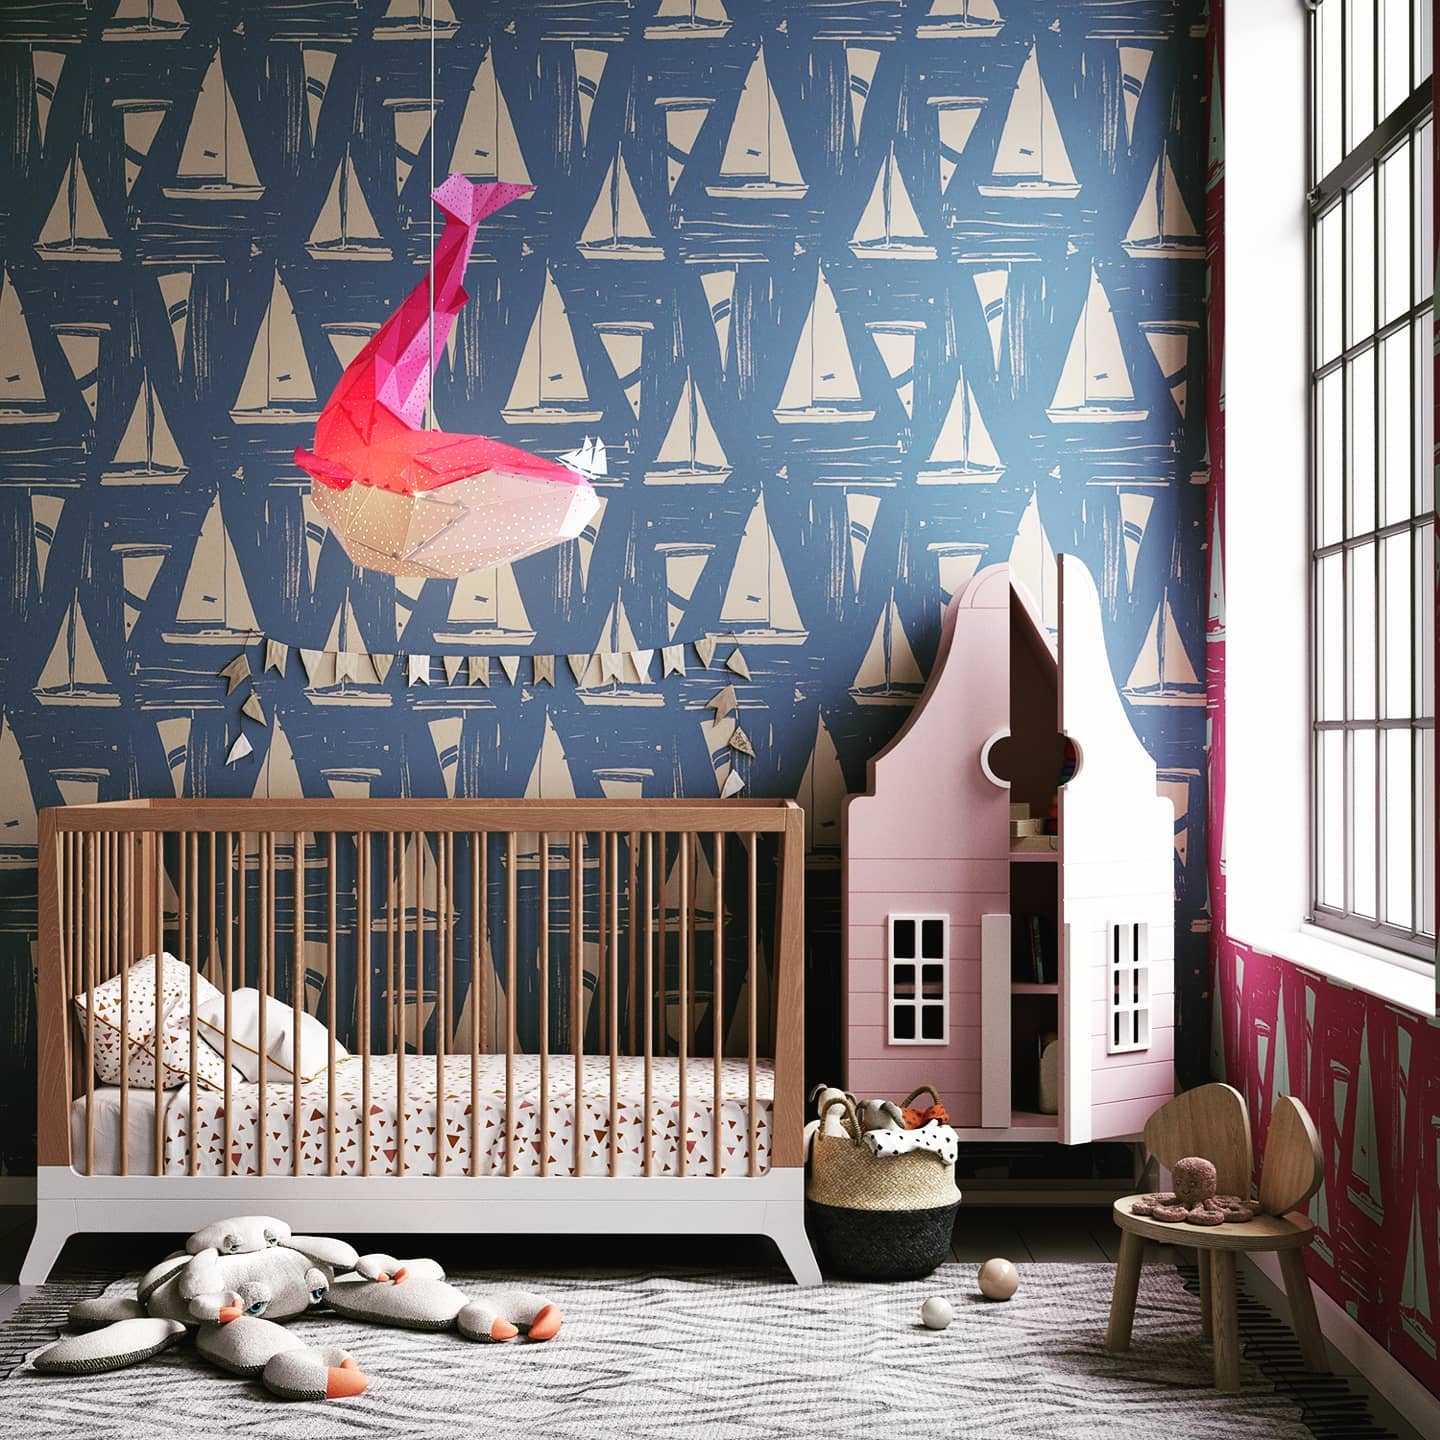 Sea themed baby room with sailboat wallpaper and whale lighting ficture. Photo by Instagram user @vasililights